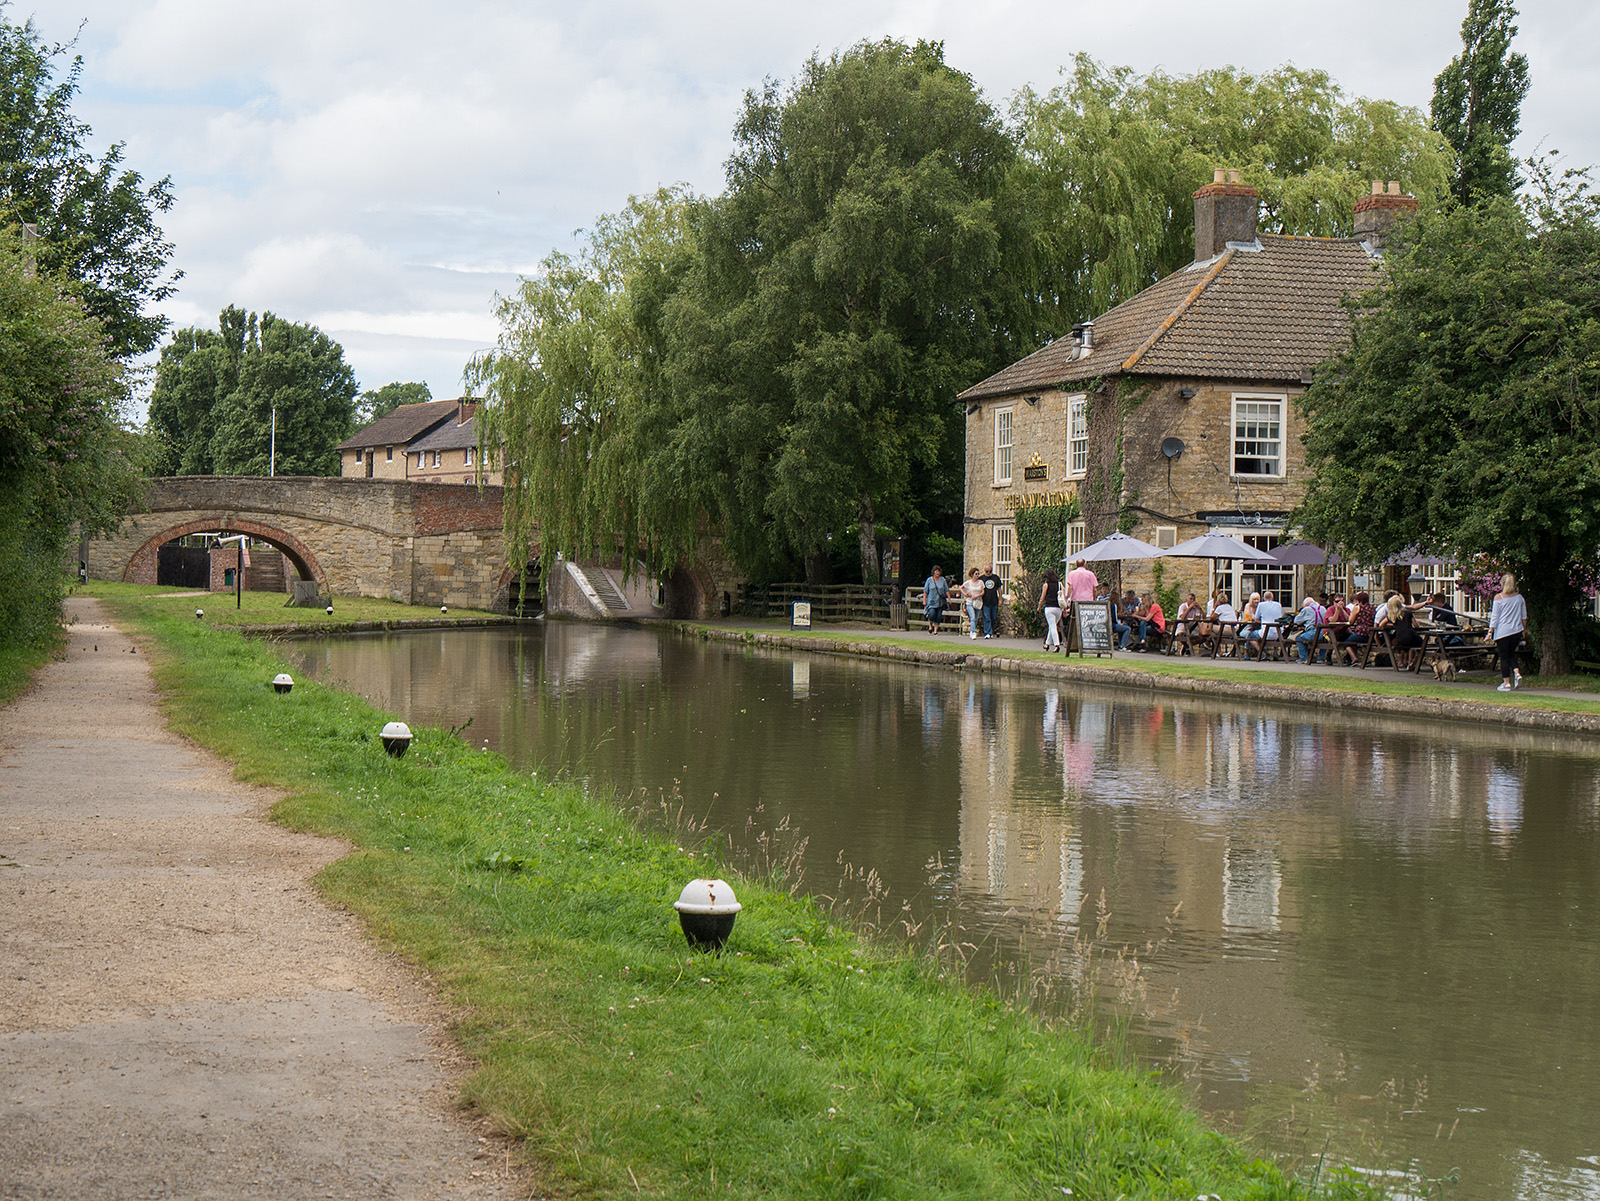 Approaching the Navigation pub. Note the wider canal and the double bridge but only one lock (RHS)